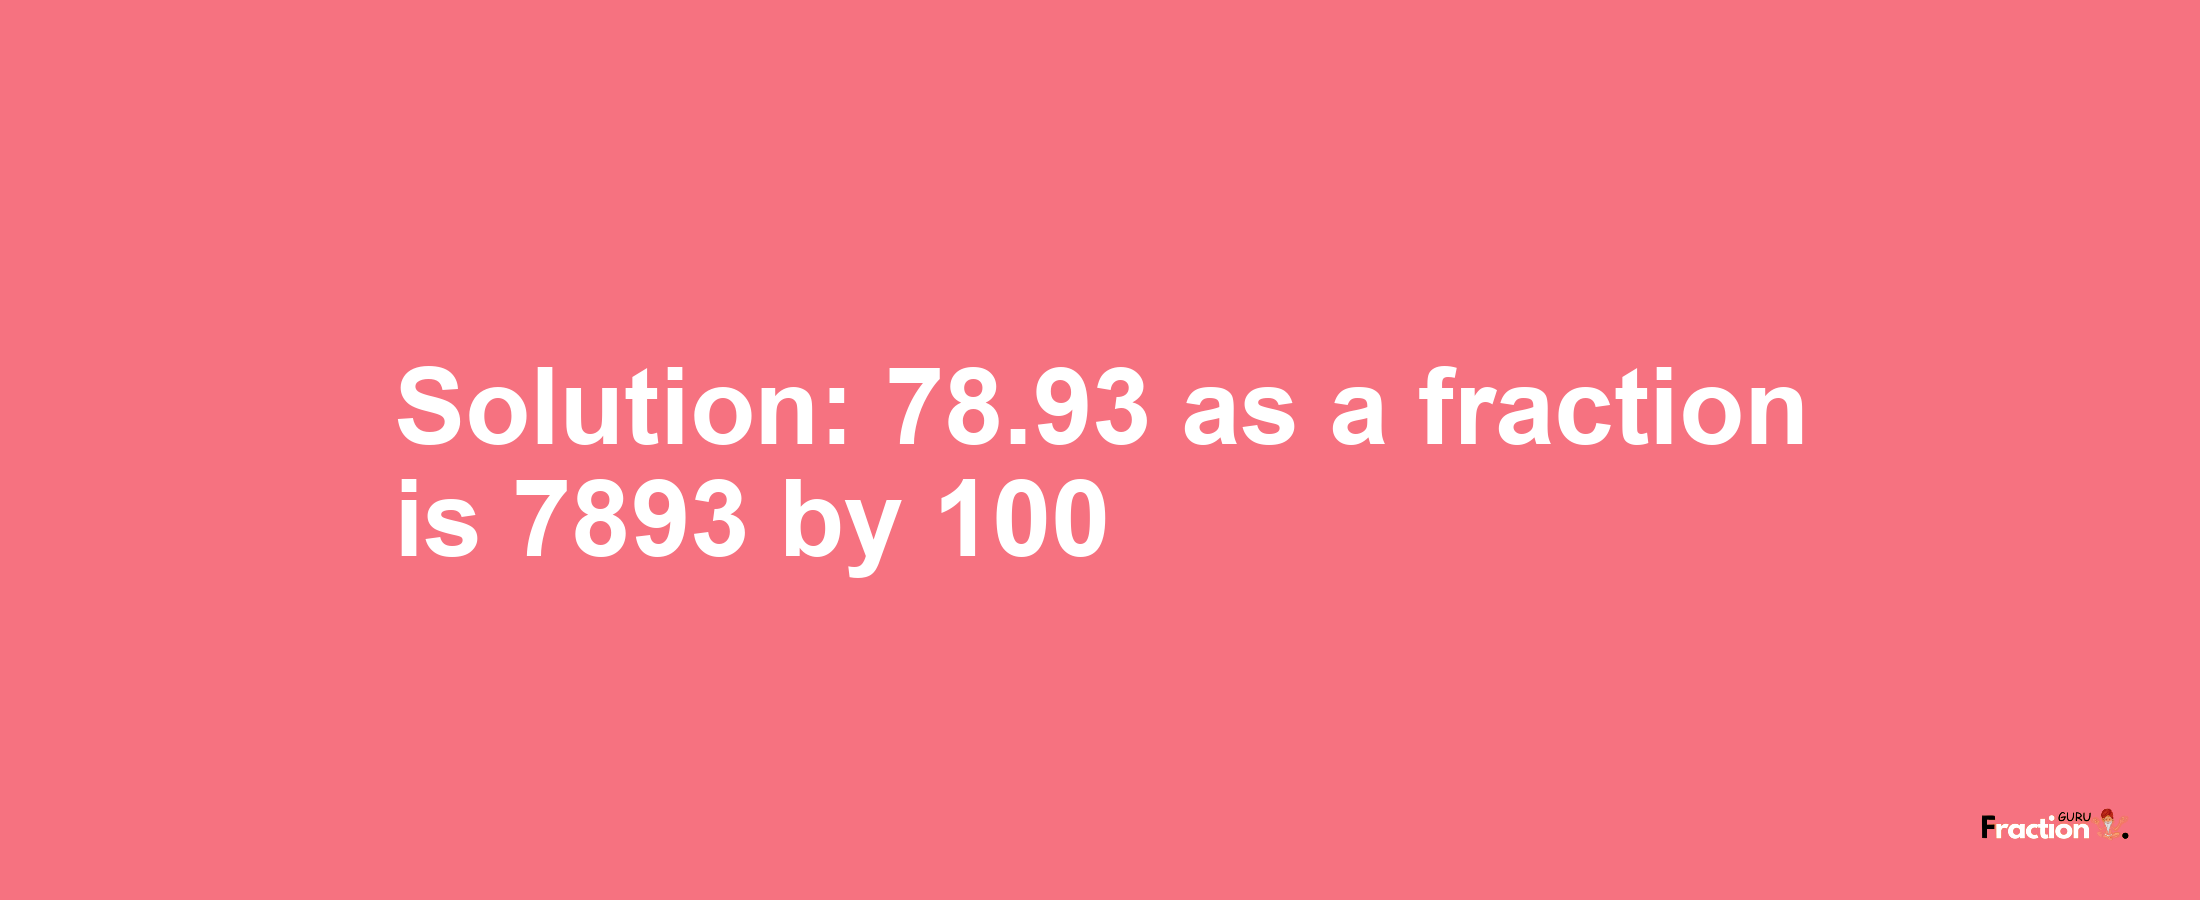 Solution:78.93 as a fraction is 7893/100